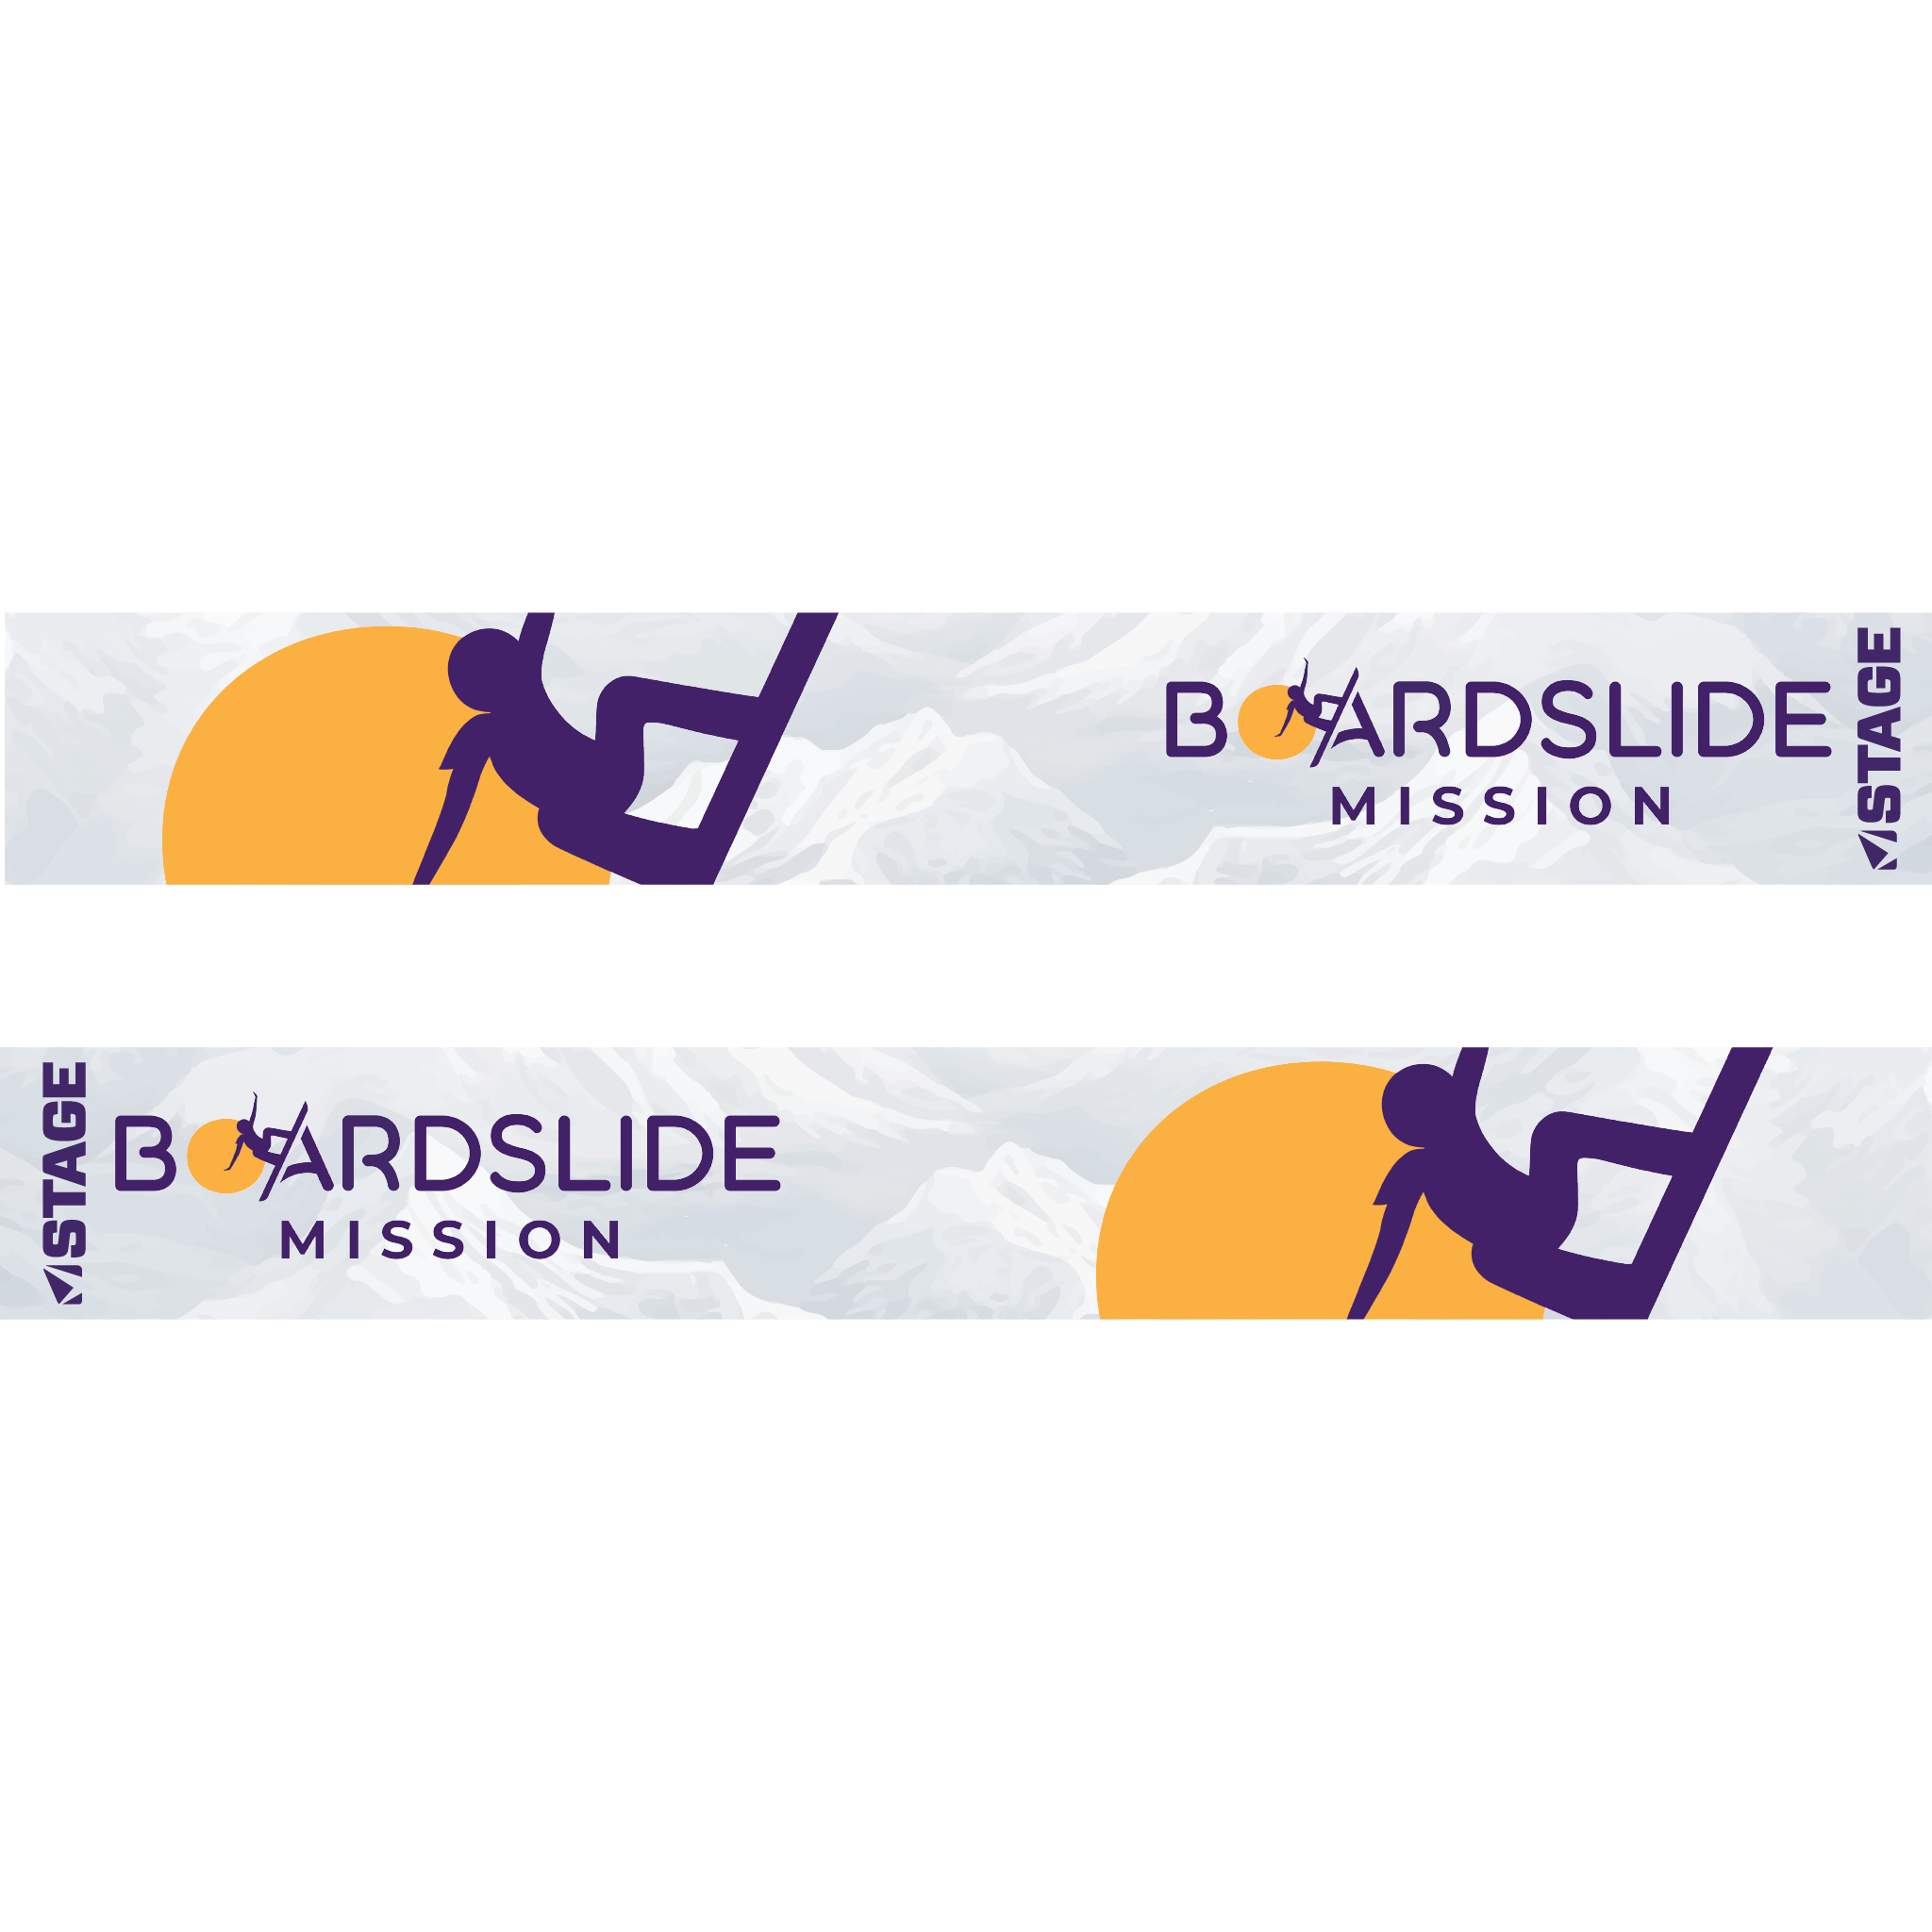 A product shot of the custom ski goggle straps featuring the Boardslide Mission logo. The custom straps also showcase the STAGE logo. 